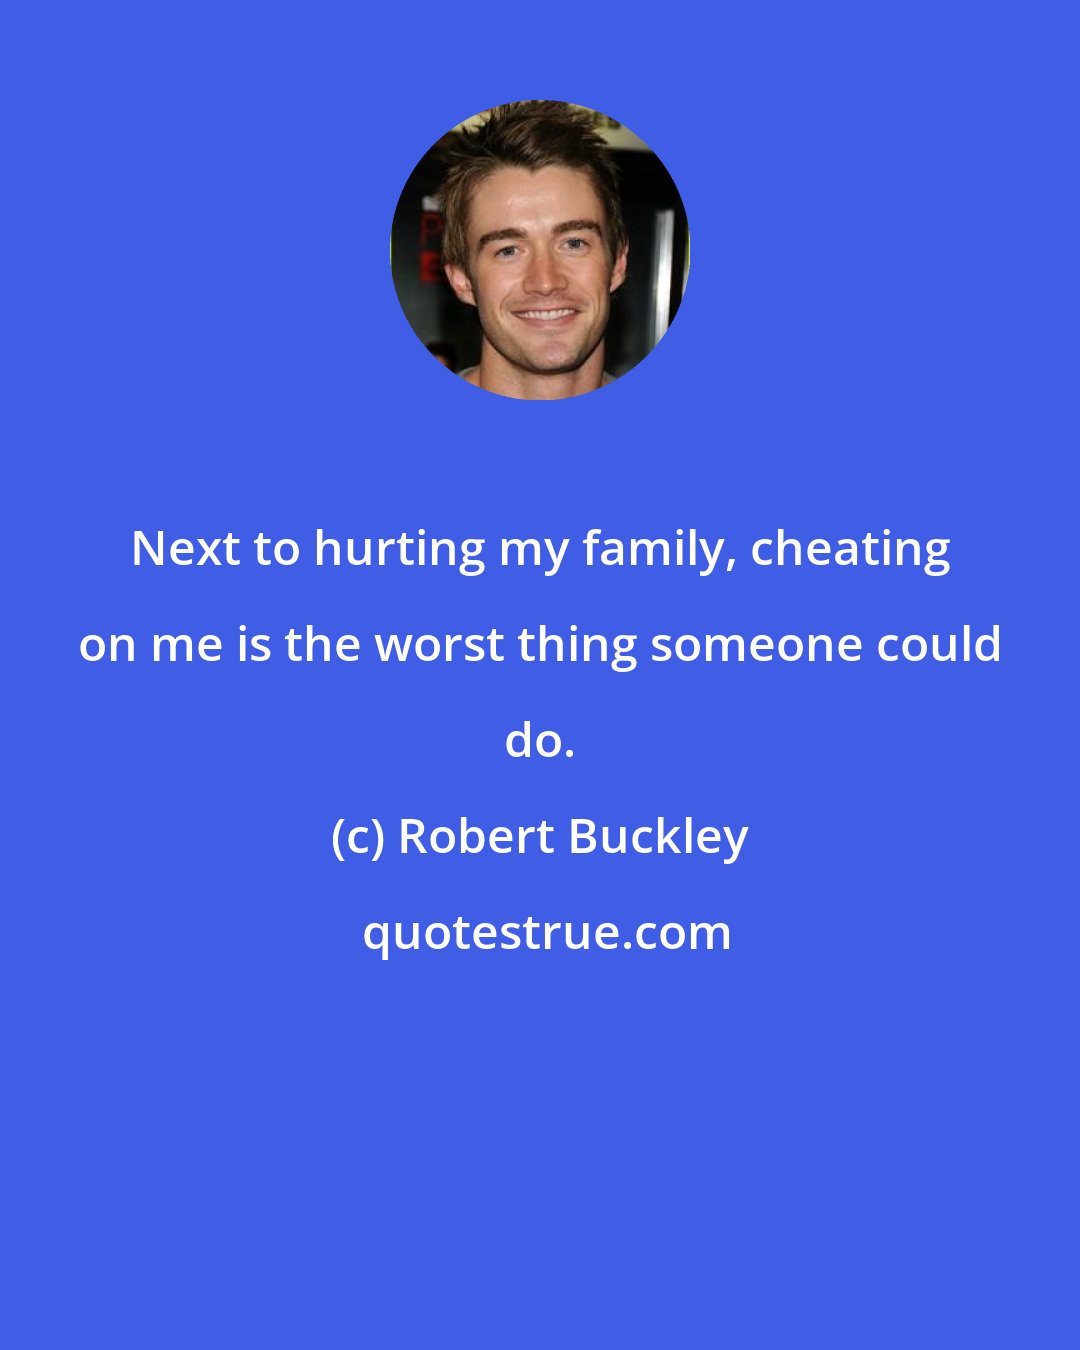 Robert Buckley: Next to hurting my family, cheating on me is the worst thing someone could do.